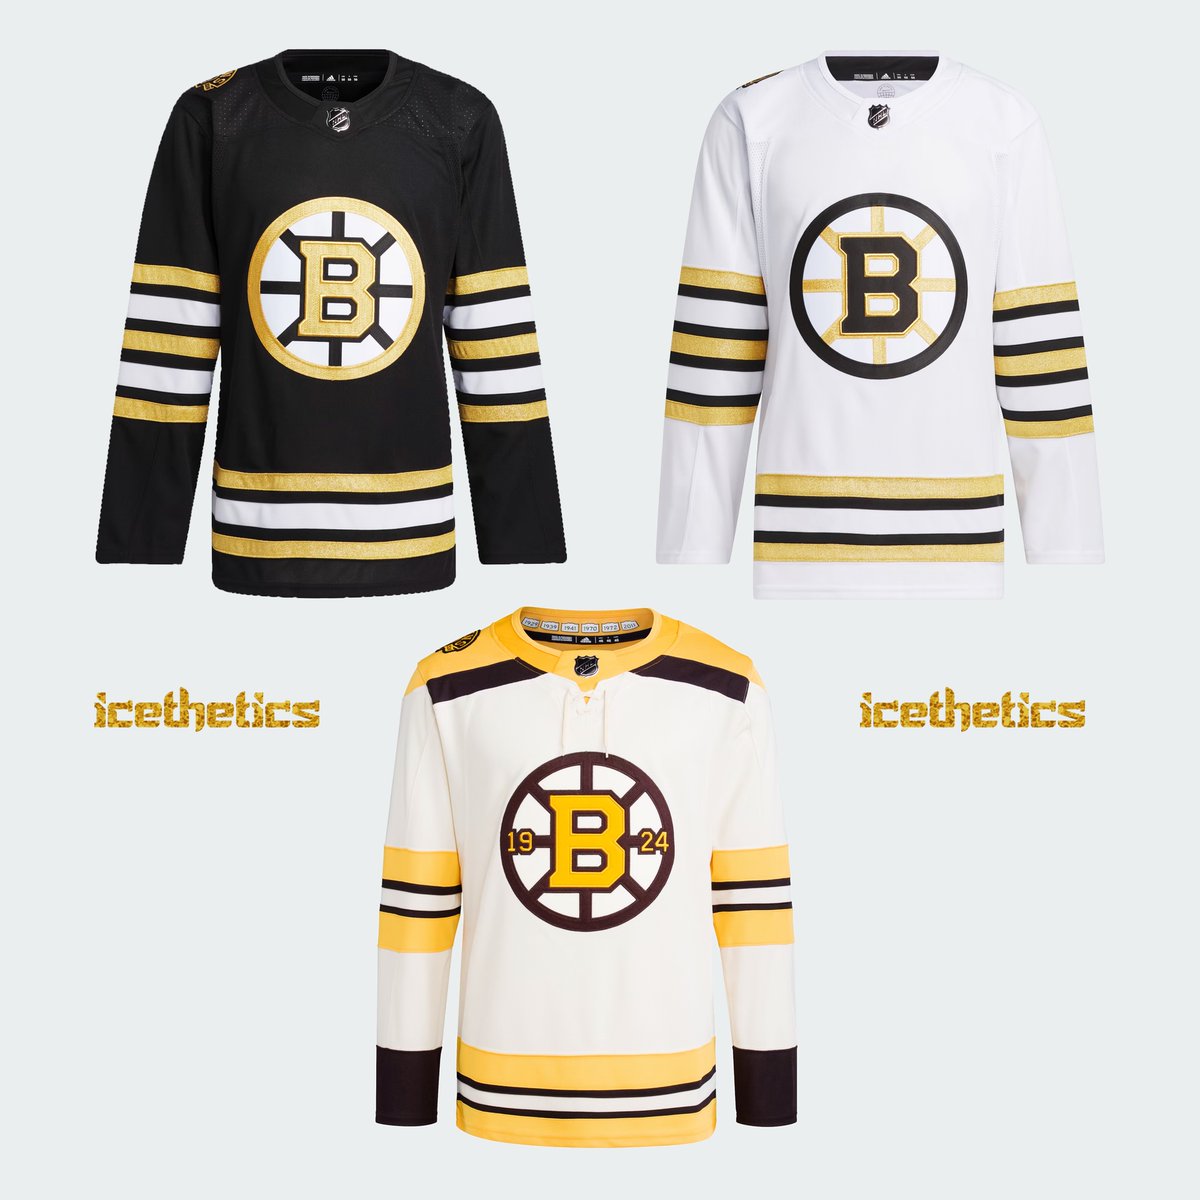 And they’ve leaked—here are the #NHLBruins new 100th anniversary uniforms for 2023-24. Images from the adidas website. Looks like they jumped the gun a bit. Official reveal just over an hour away.